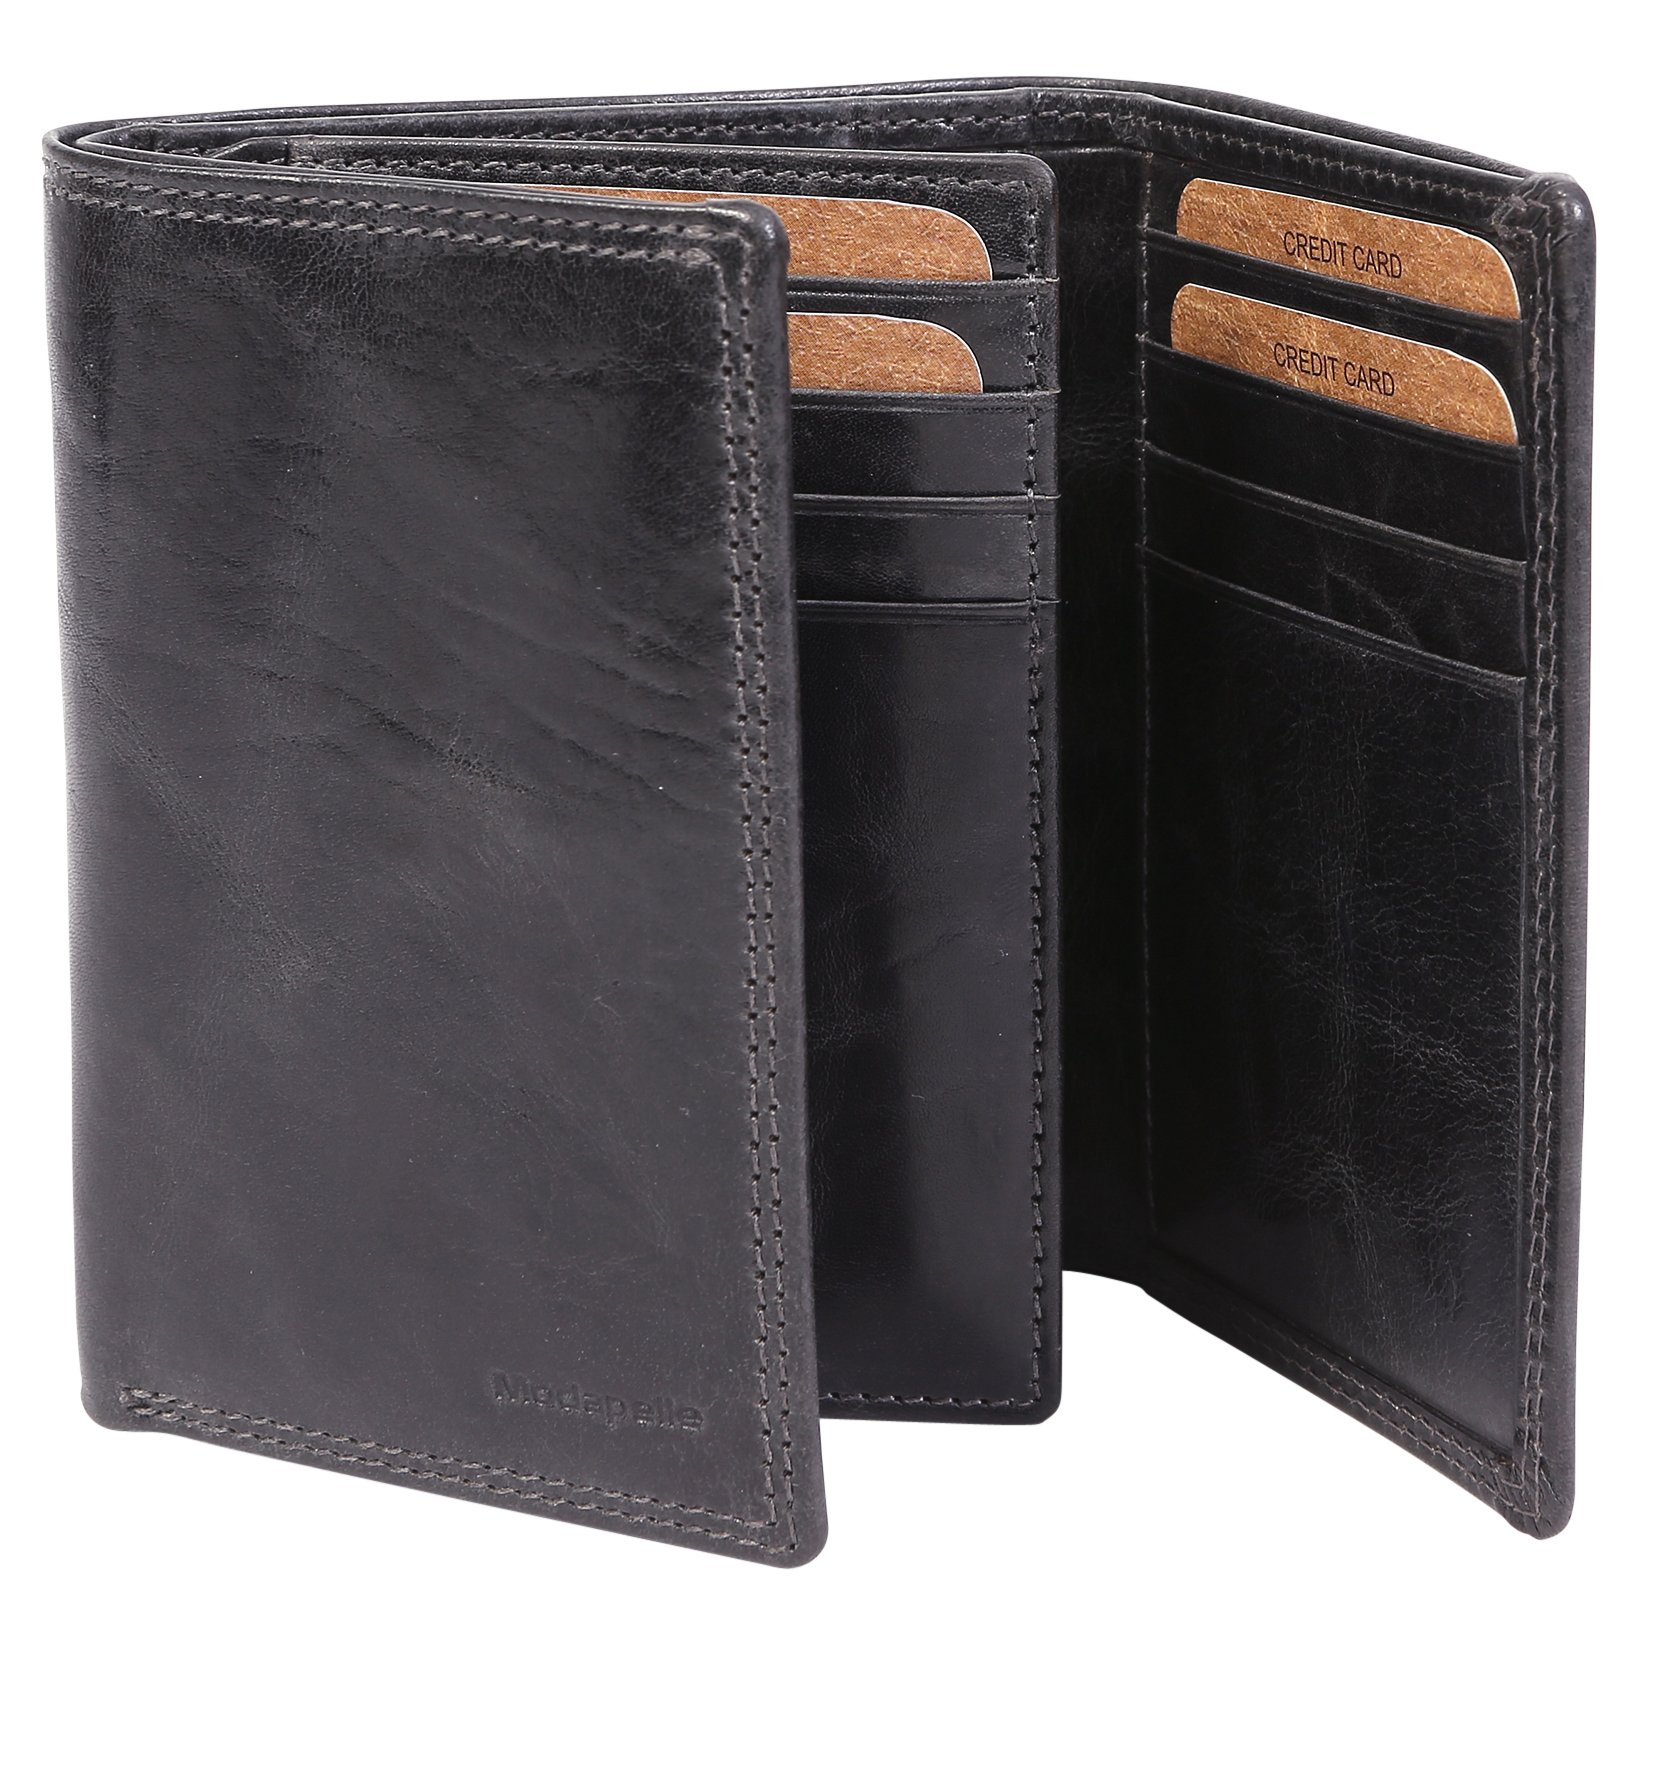 Mens Trifold Leather Wallet Australia :: Keweenaw Bay Indian Community